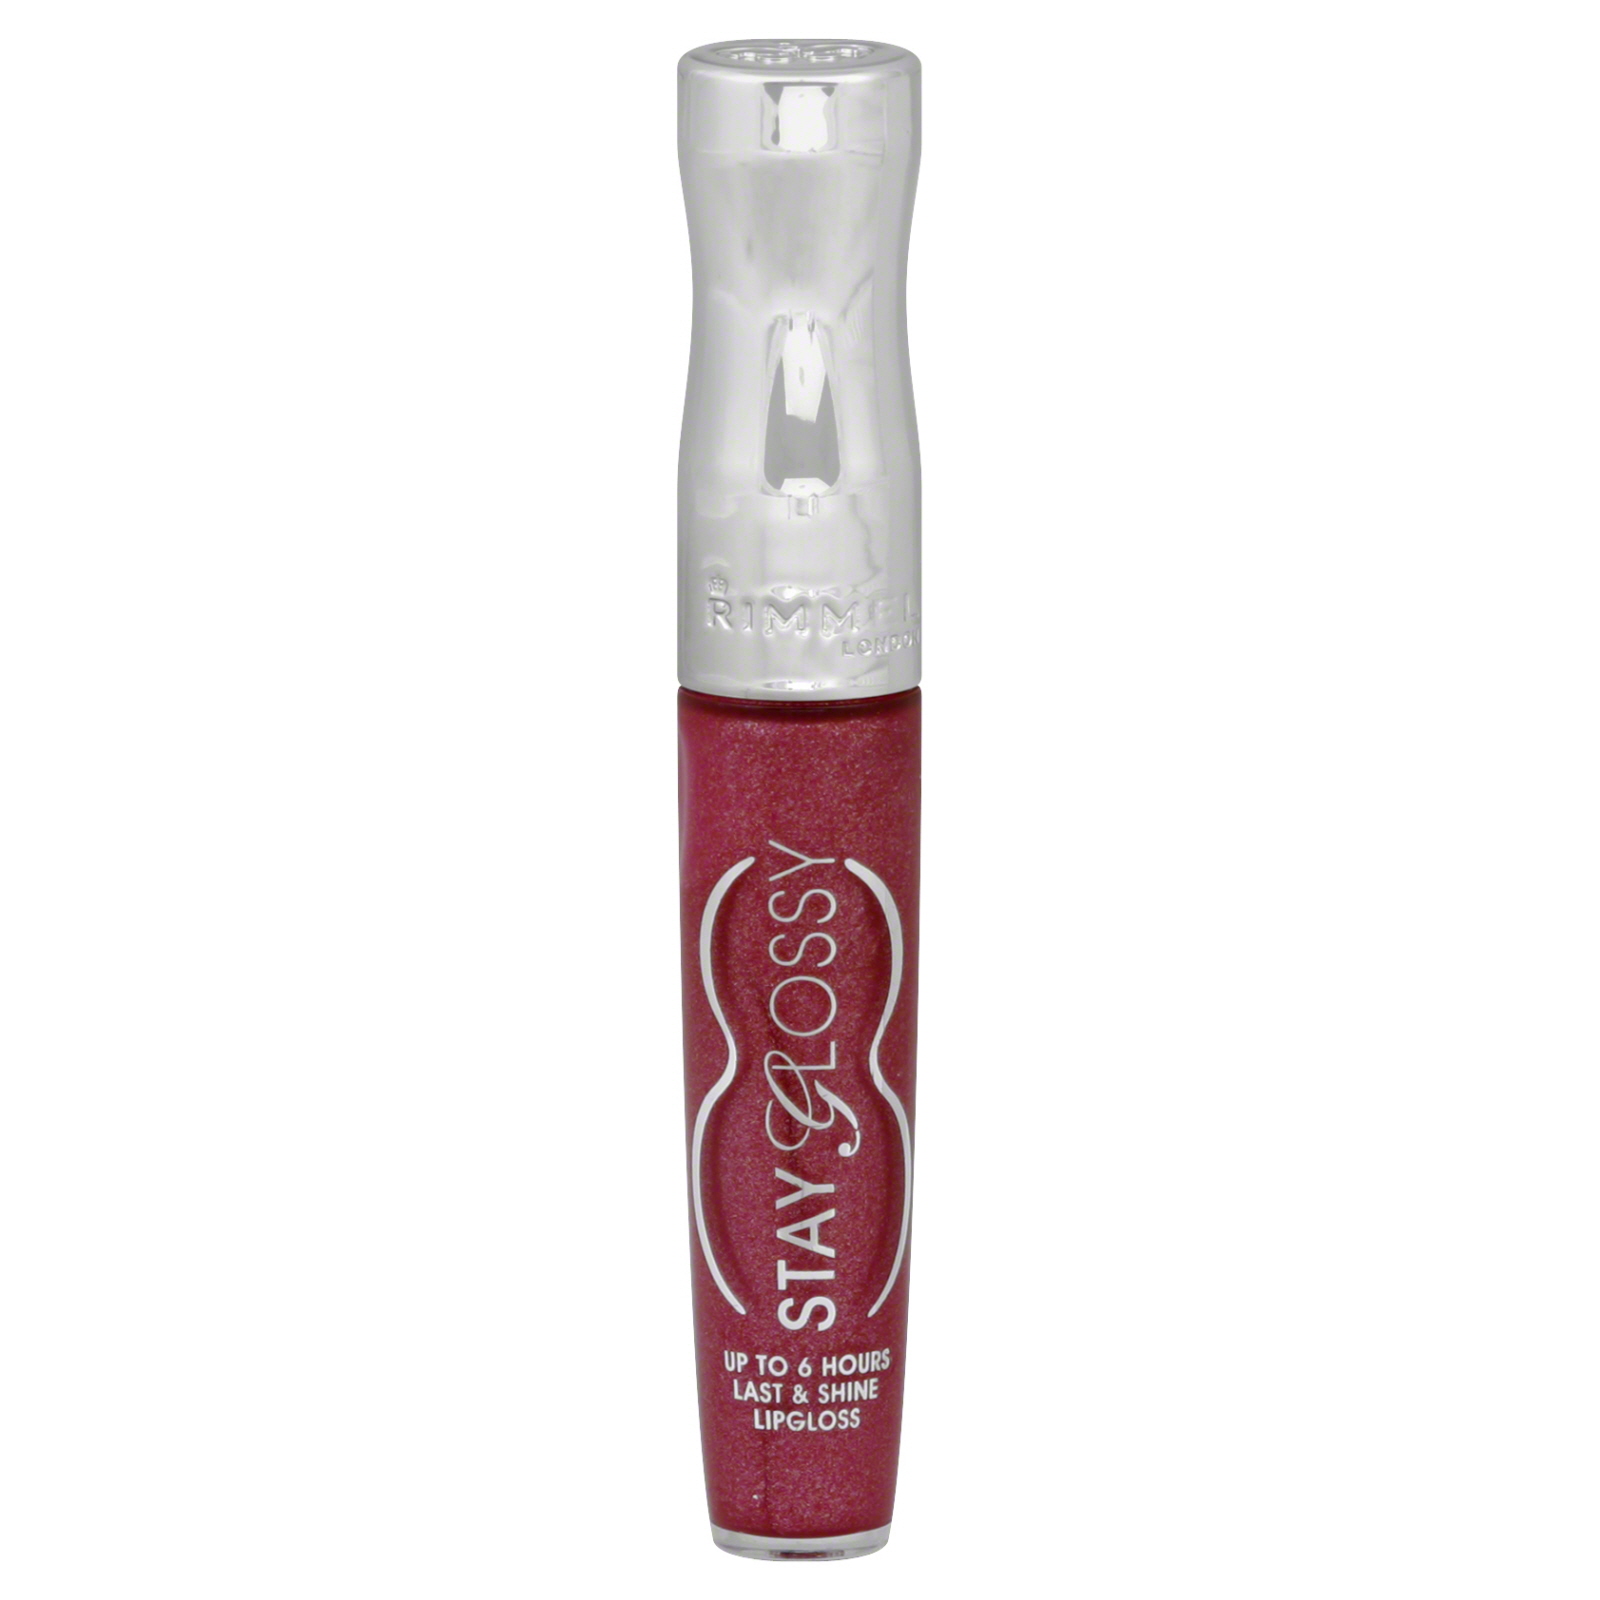 Rimmel Stay Glossy Last & Shine Lipgloss Jewel in the Crown